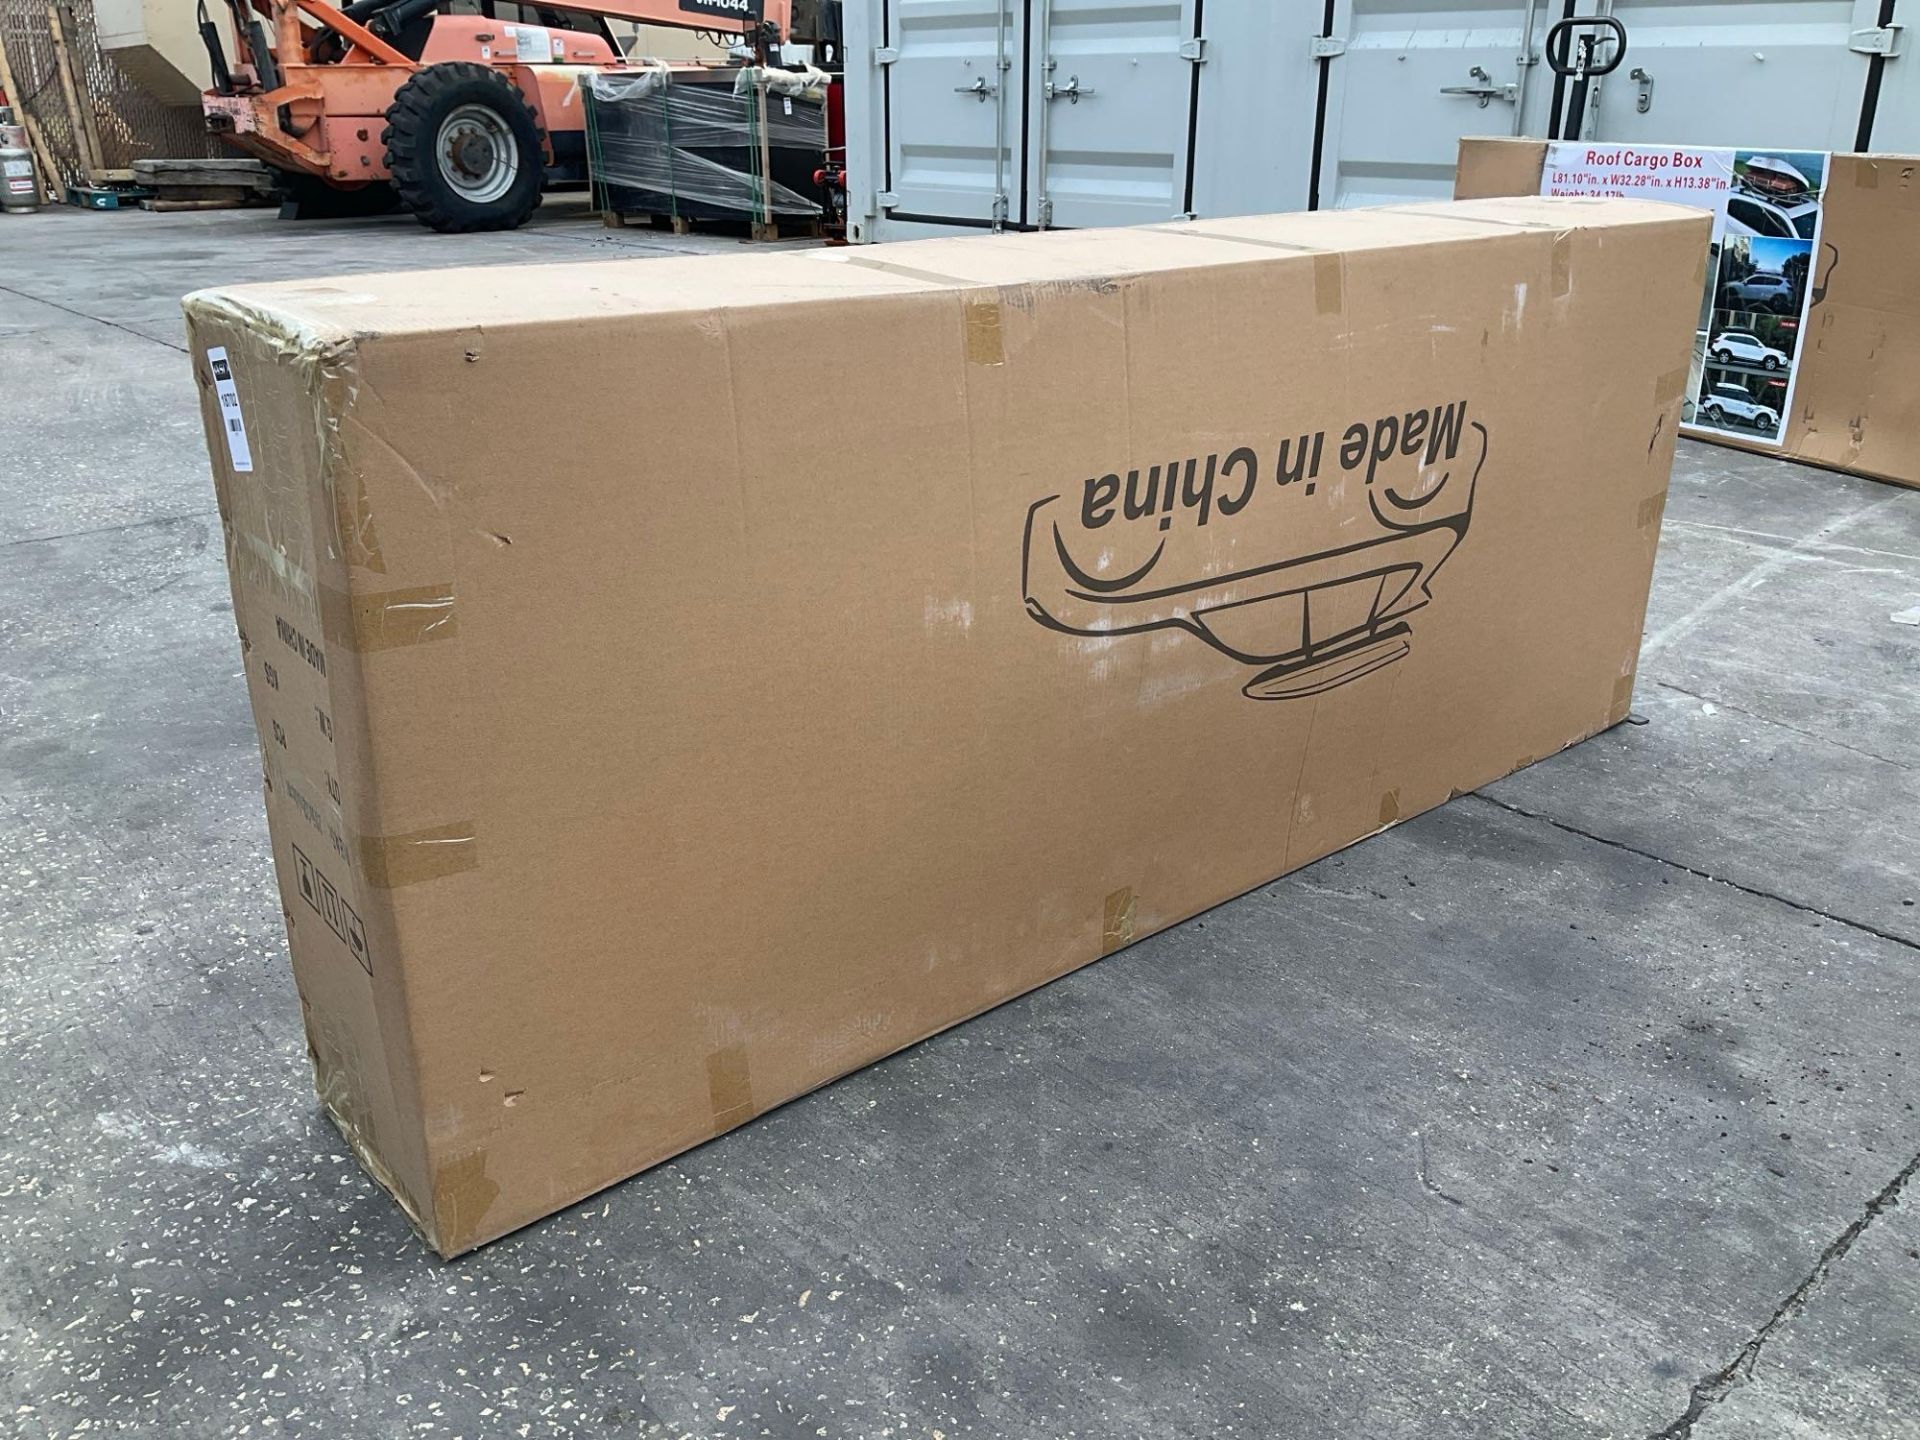 UNUSED ROOF CARGO BOX, APPROX 81.10" L x 32.28" W X 13.38" T, APPROX 1 IN BOX - Image 5 of 6